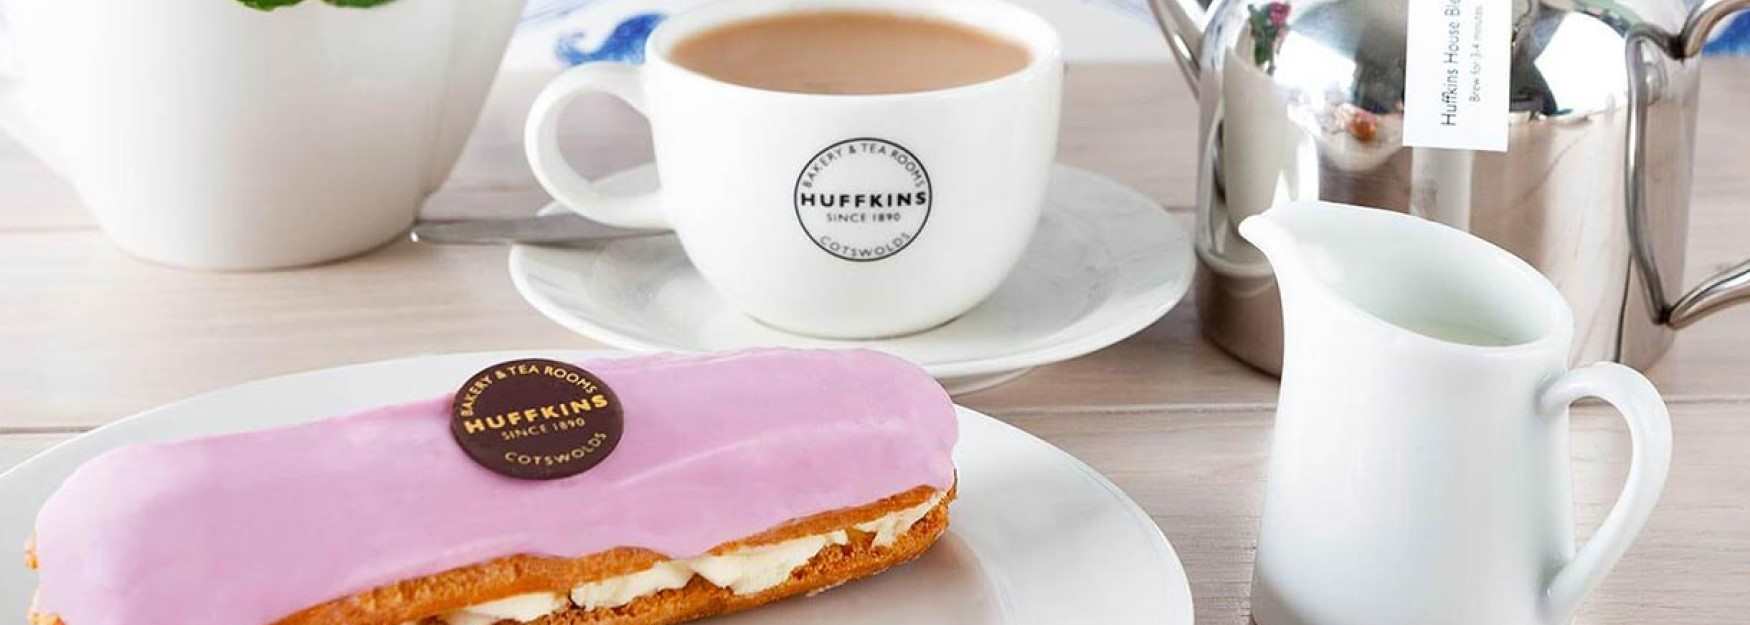 Tea and cream cake at Huffkins cafes in Burford and Witney